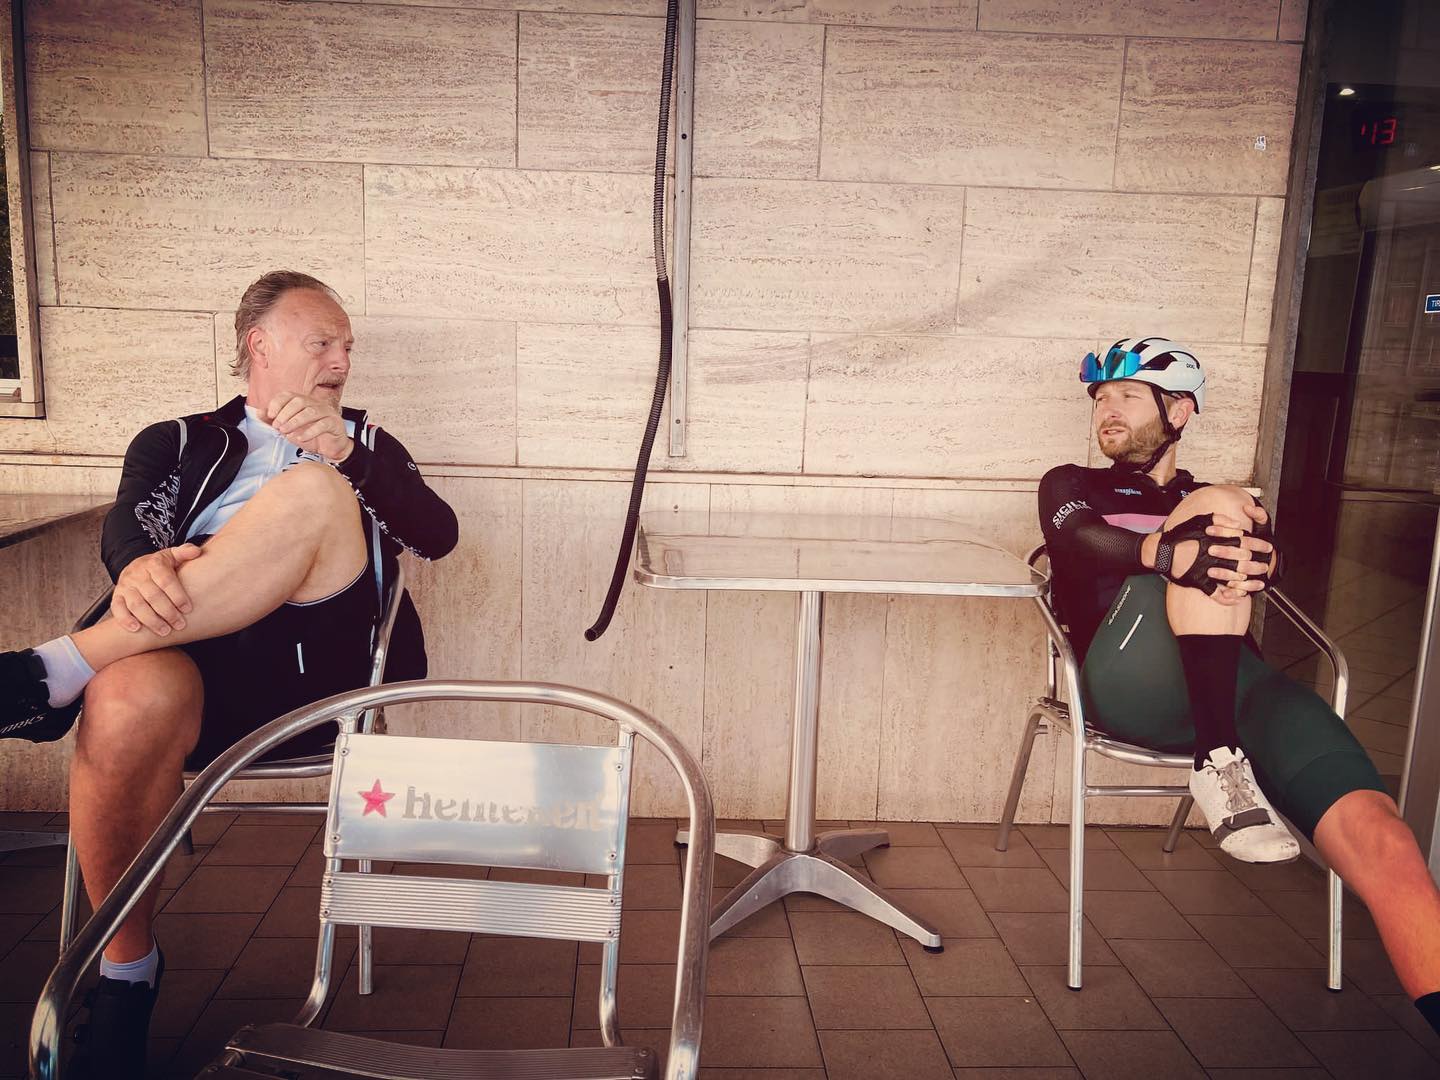 Tour de Cafe! 
This is what we like 🤣

#sicilycycling #sicilycyclingtours #cyclingtours #sicily #travel